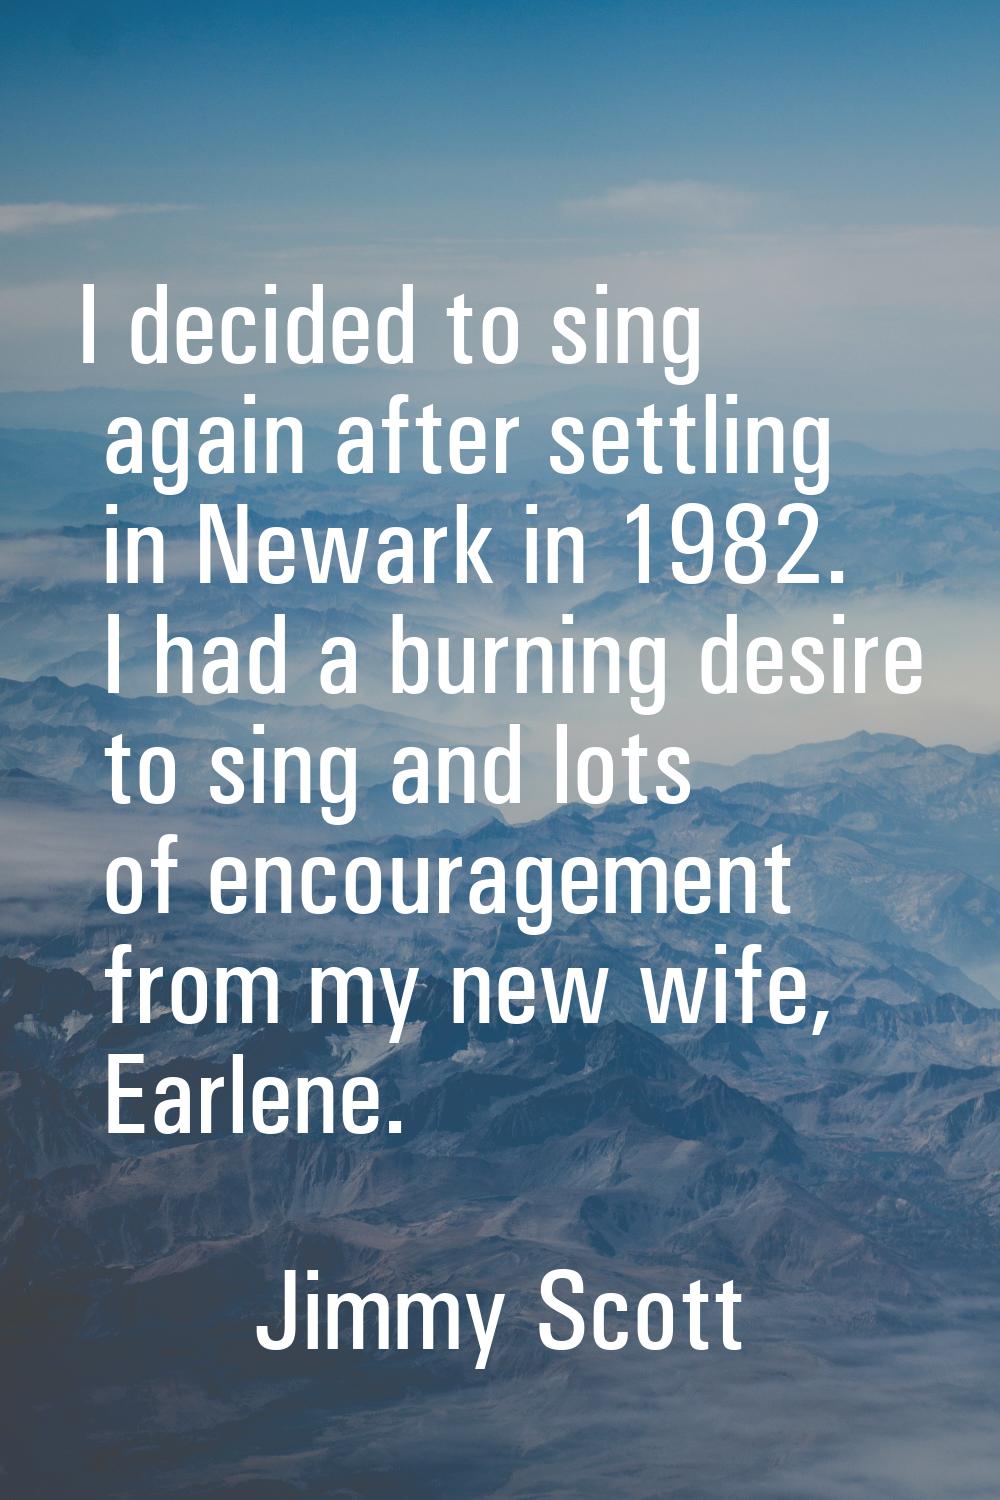 I decided to sing again after settling in Newark in 1982. I had a burning desire to sing and lots o